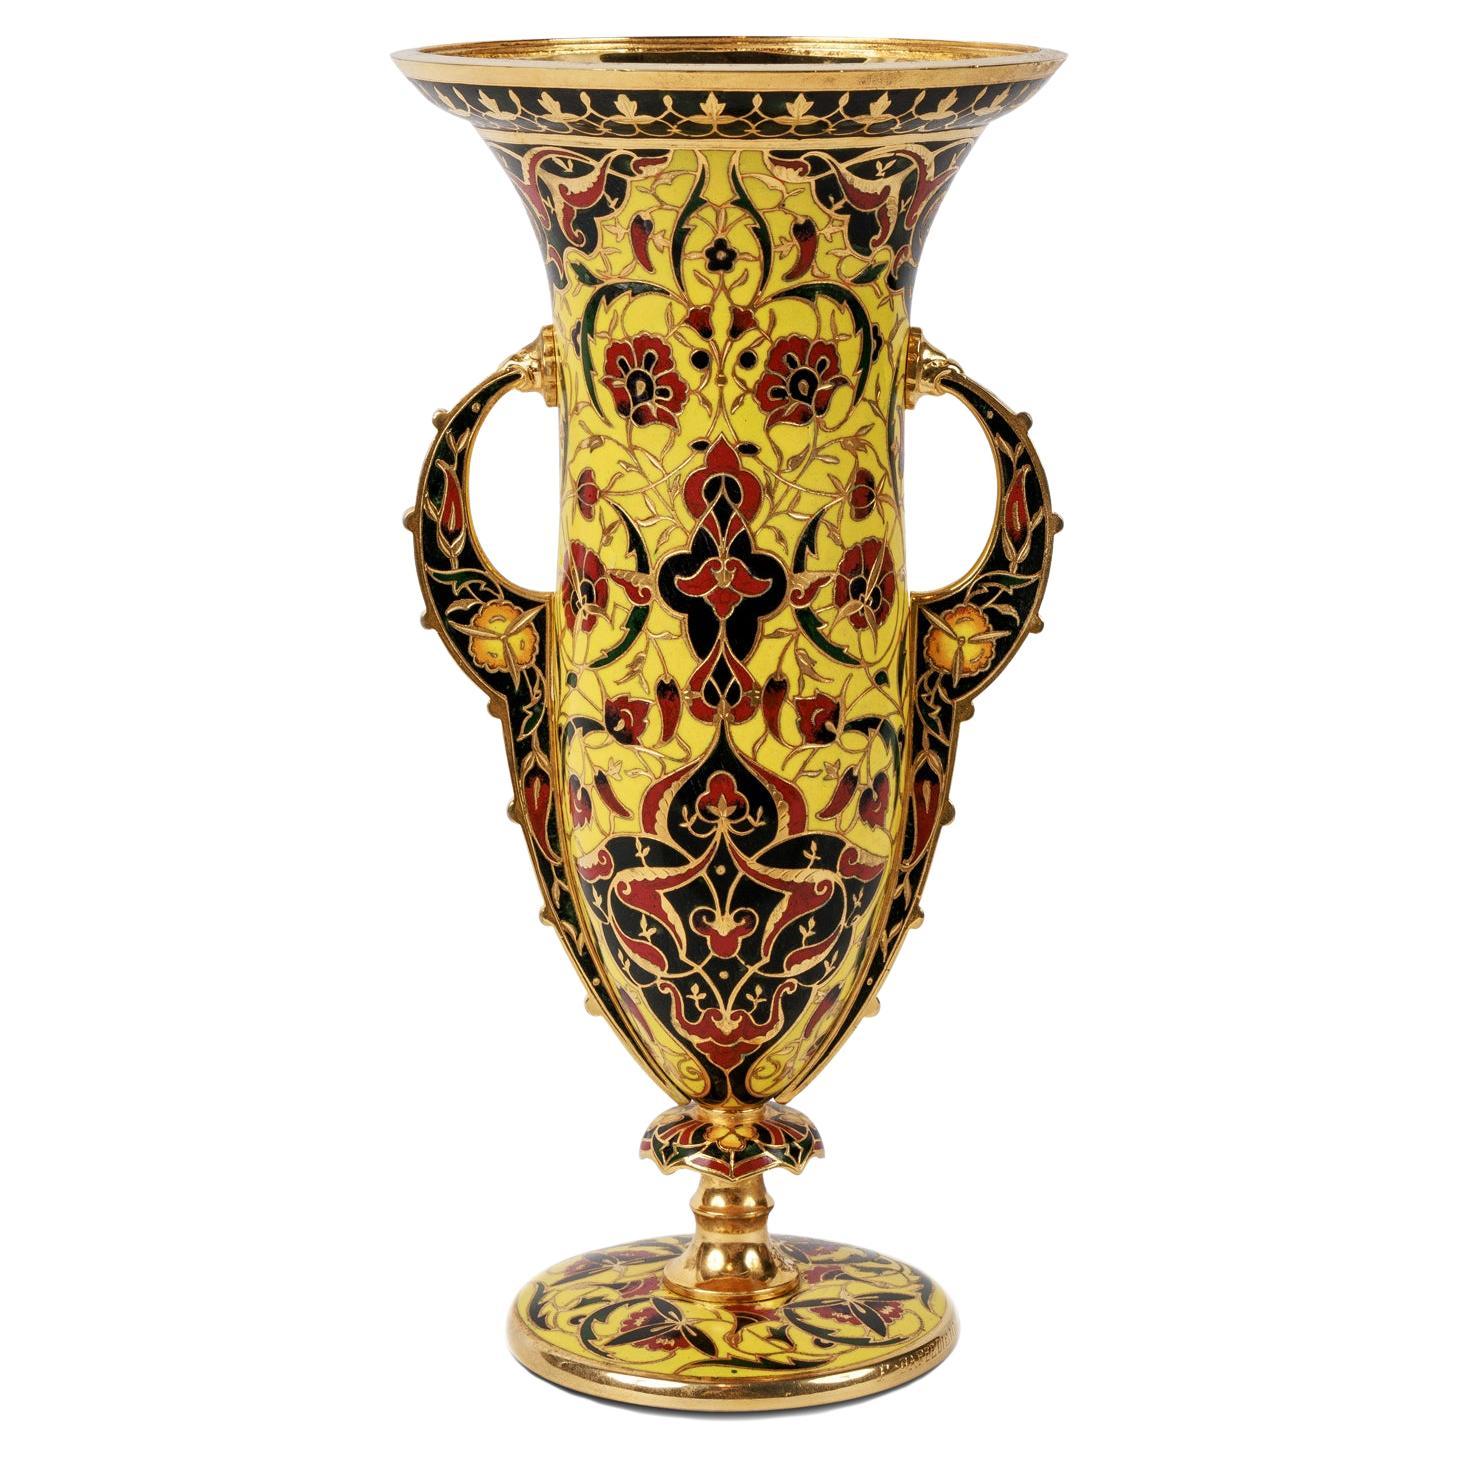 Ferdinand Barbedienne, A French Ormolu and Champleve Enamel Vase, C. 1870 For Sale